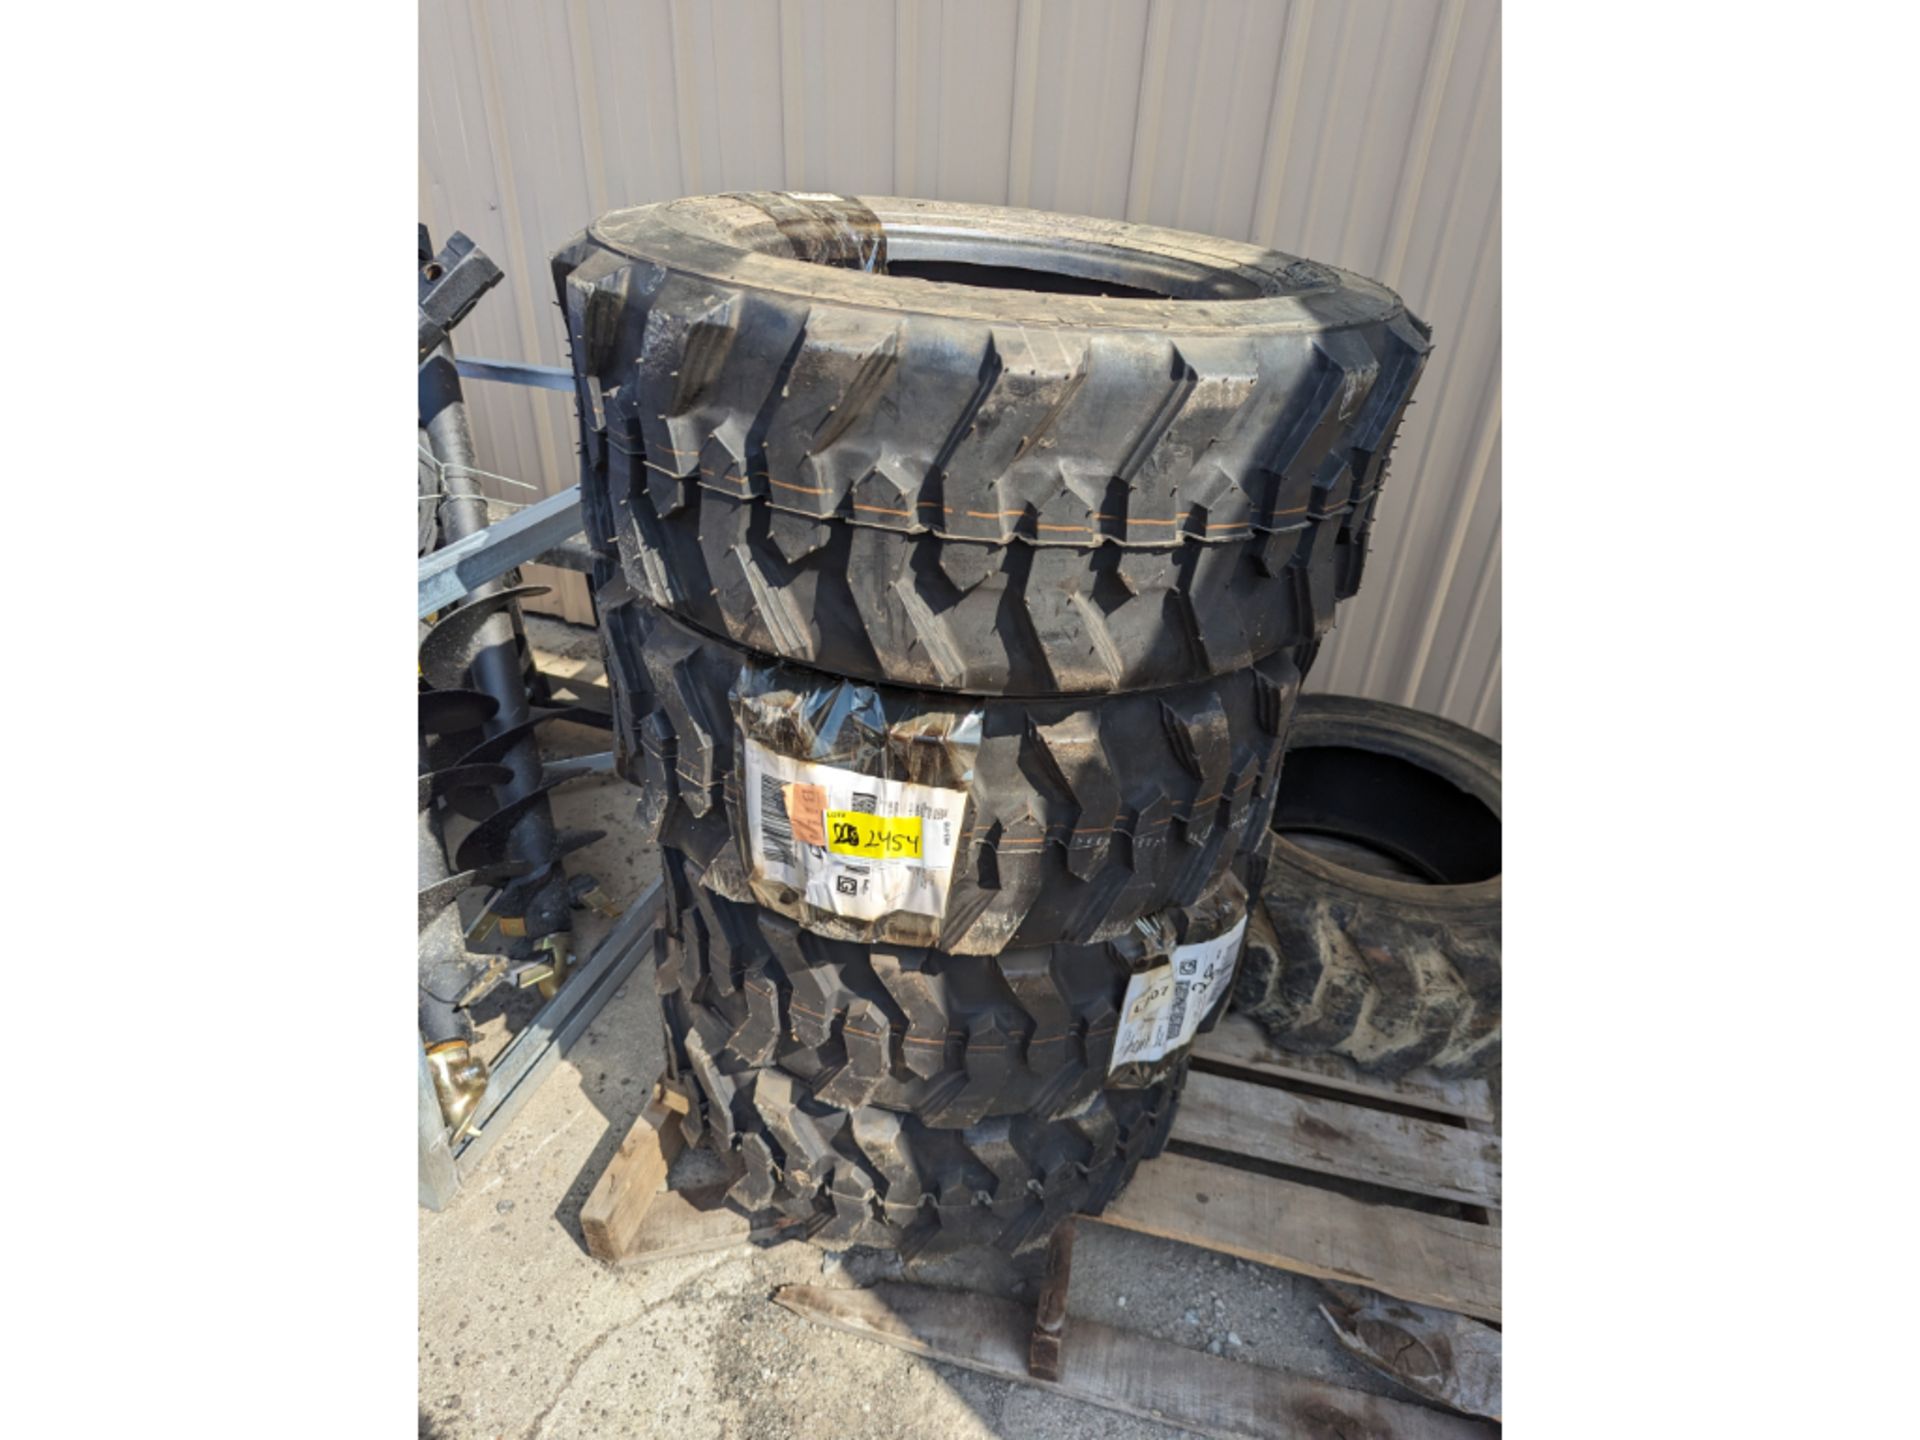 4 NEW Road Crew SKS-1 Skid Steer Tires, 1 Used Tire, 10-16.5 - Image 2 of 10